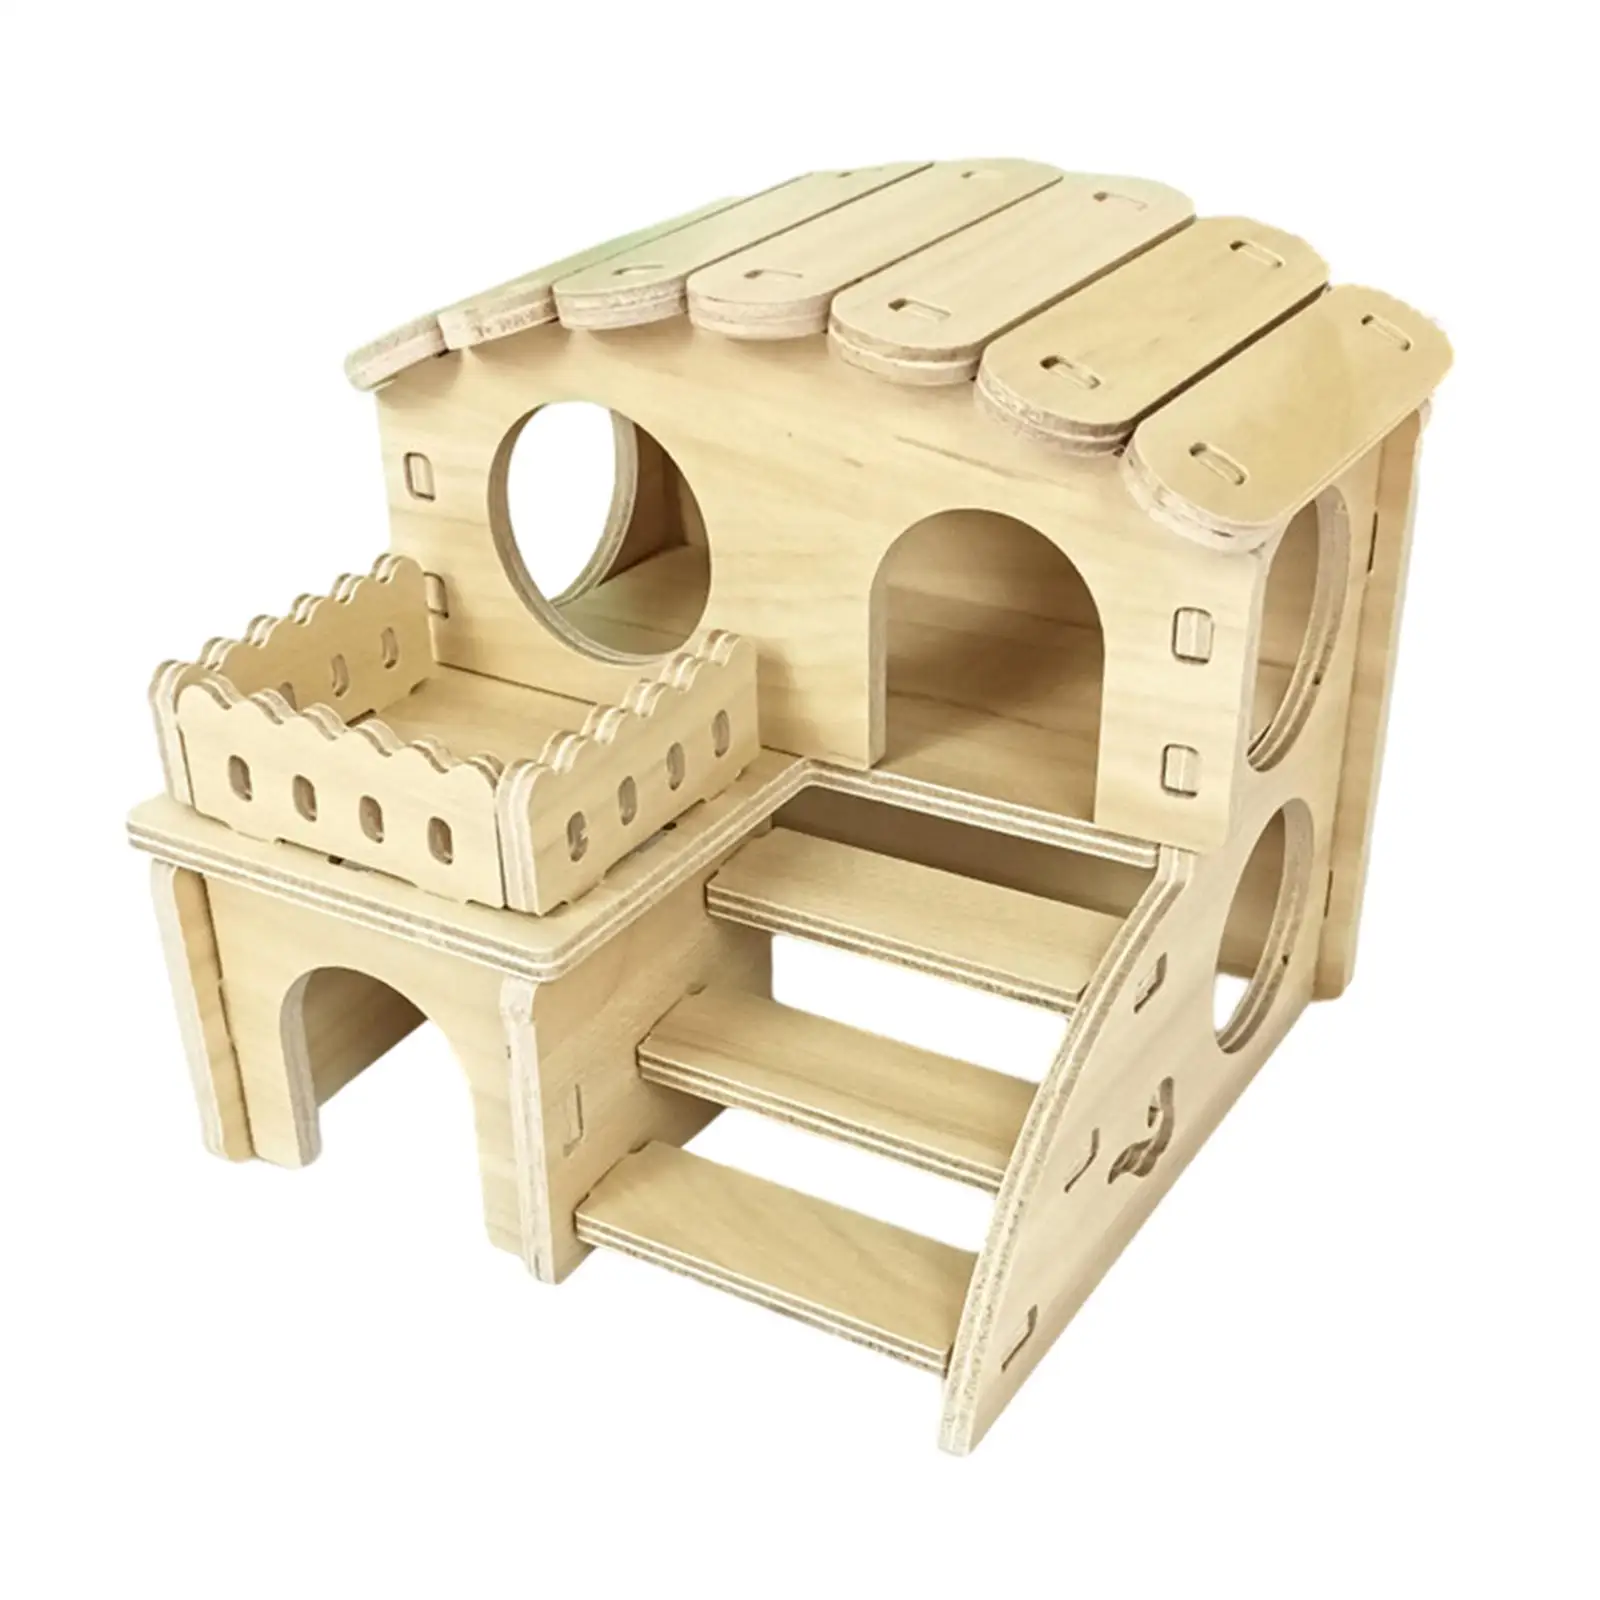 Small Pet Castle Home Small Animal Habitat Decor Washable Hamster Hideaway for